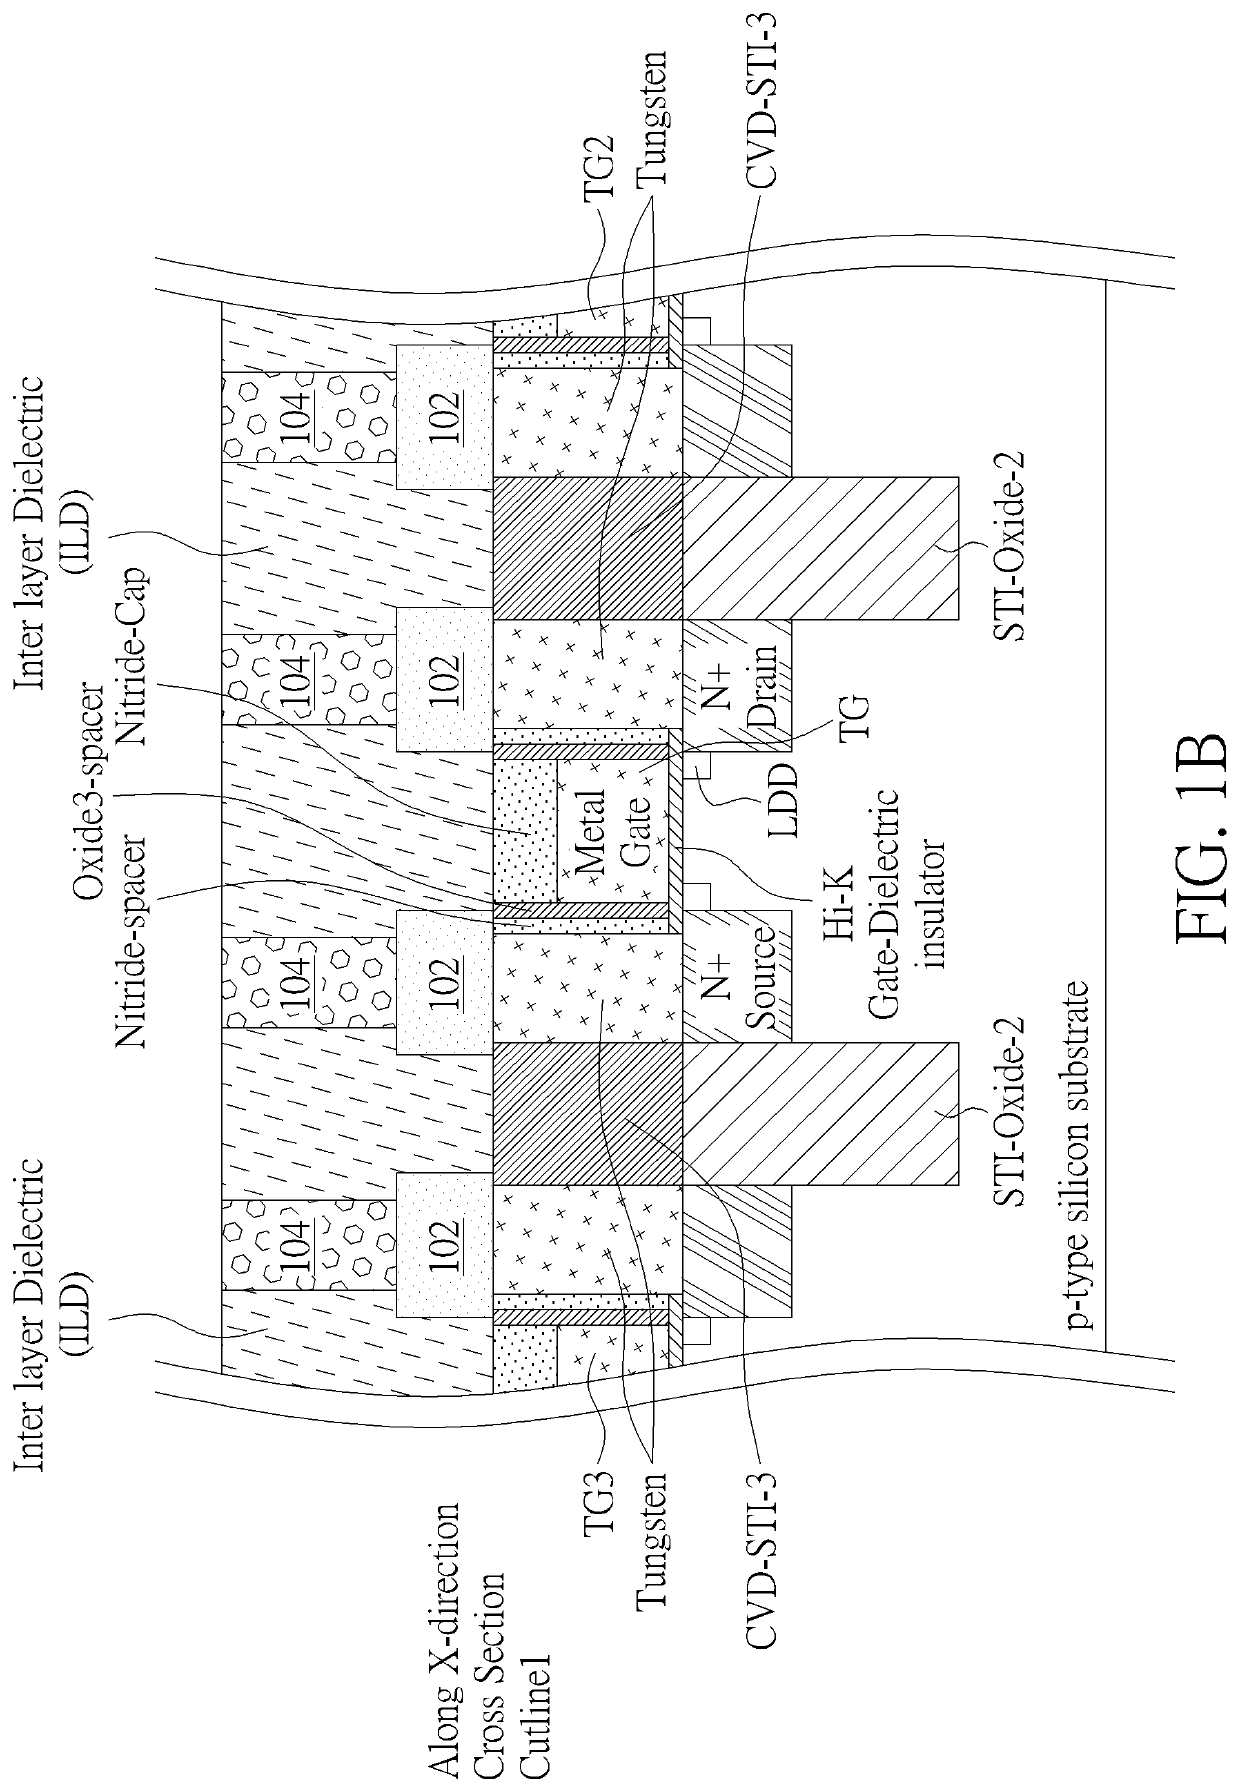 Transistor structure with metal interconnection directly connecting gate and drain/source regions